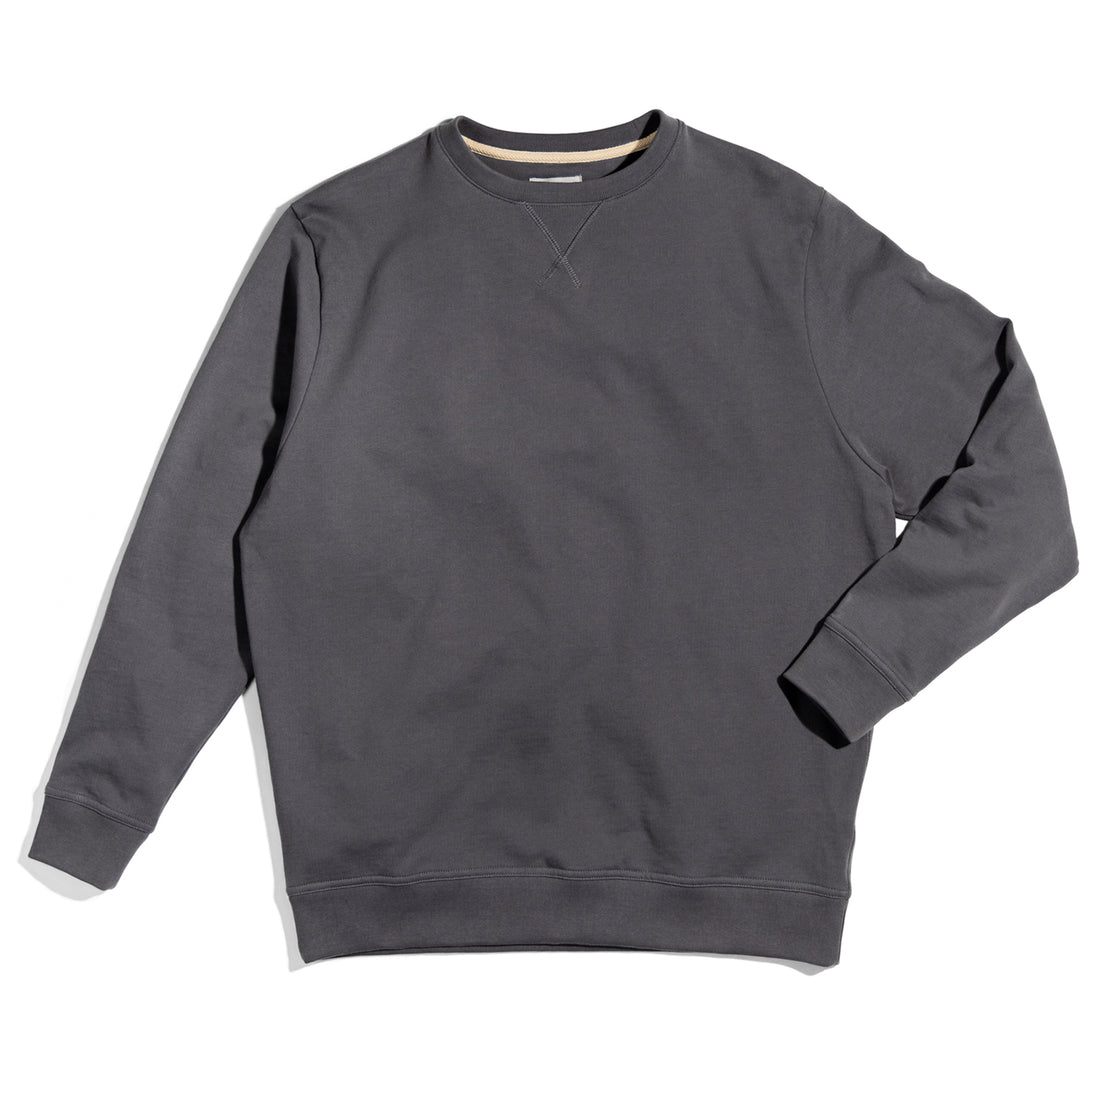 TOMORROWS LAUNDRY - FRENCH TERRY CREWNECK - QUIET SHADE